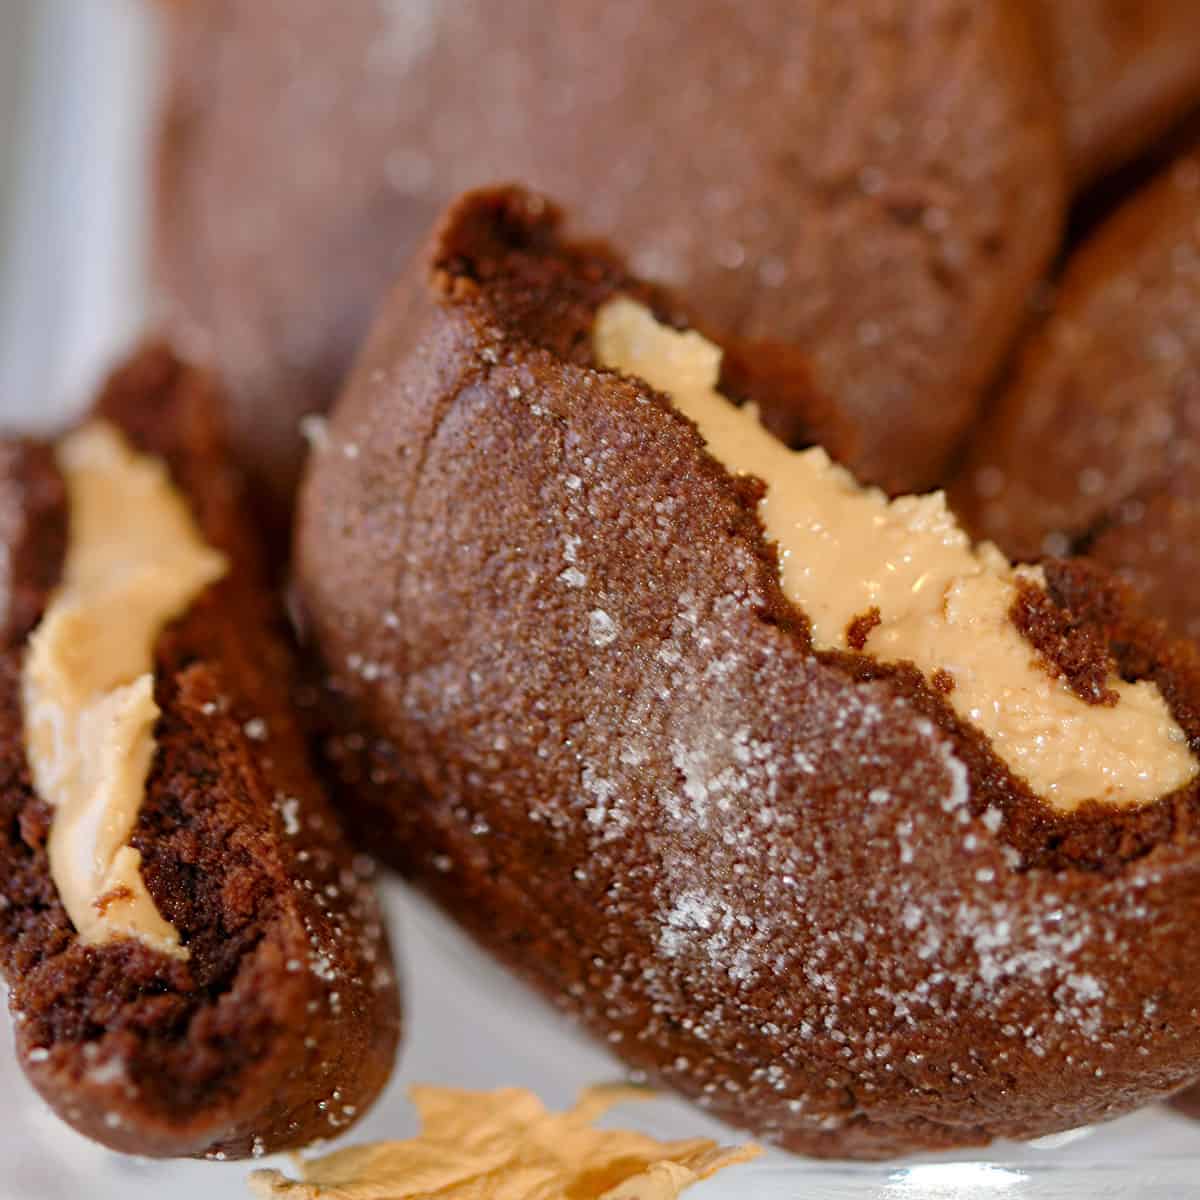 A finished Peanut Butter Stuffed Chocolate Cookie that is broken in half to see the peanut butter middle.